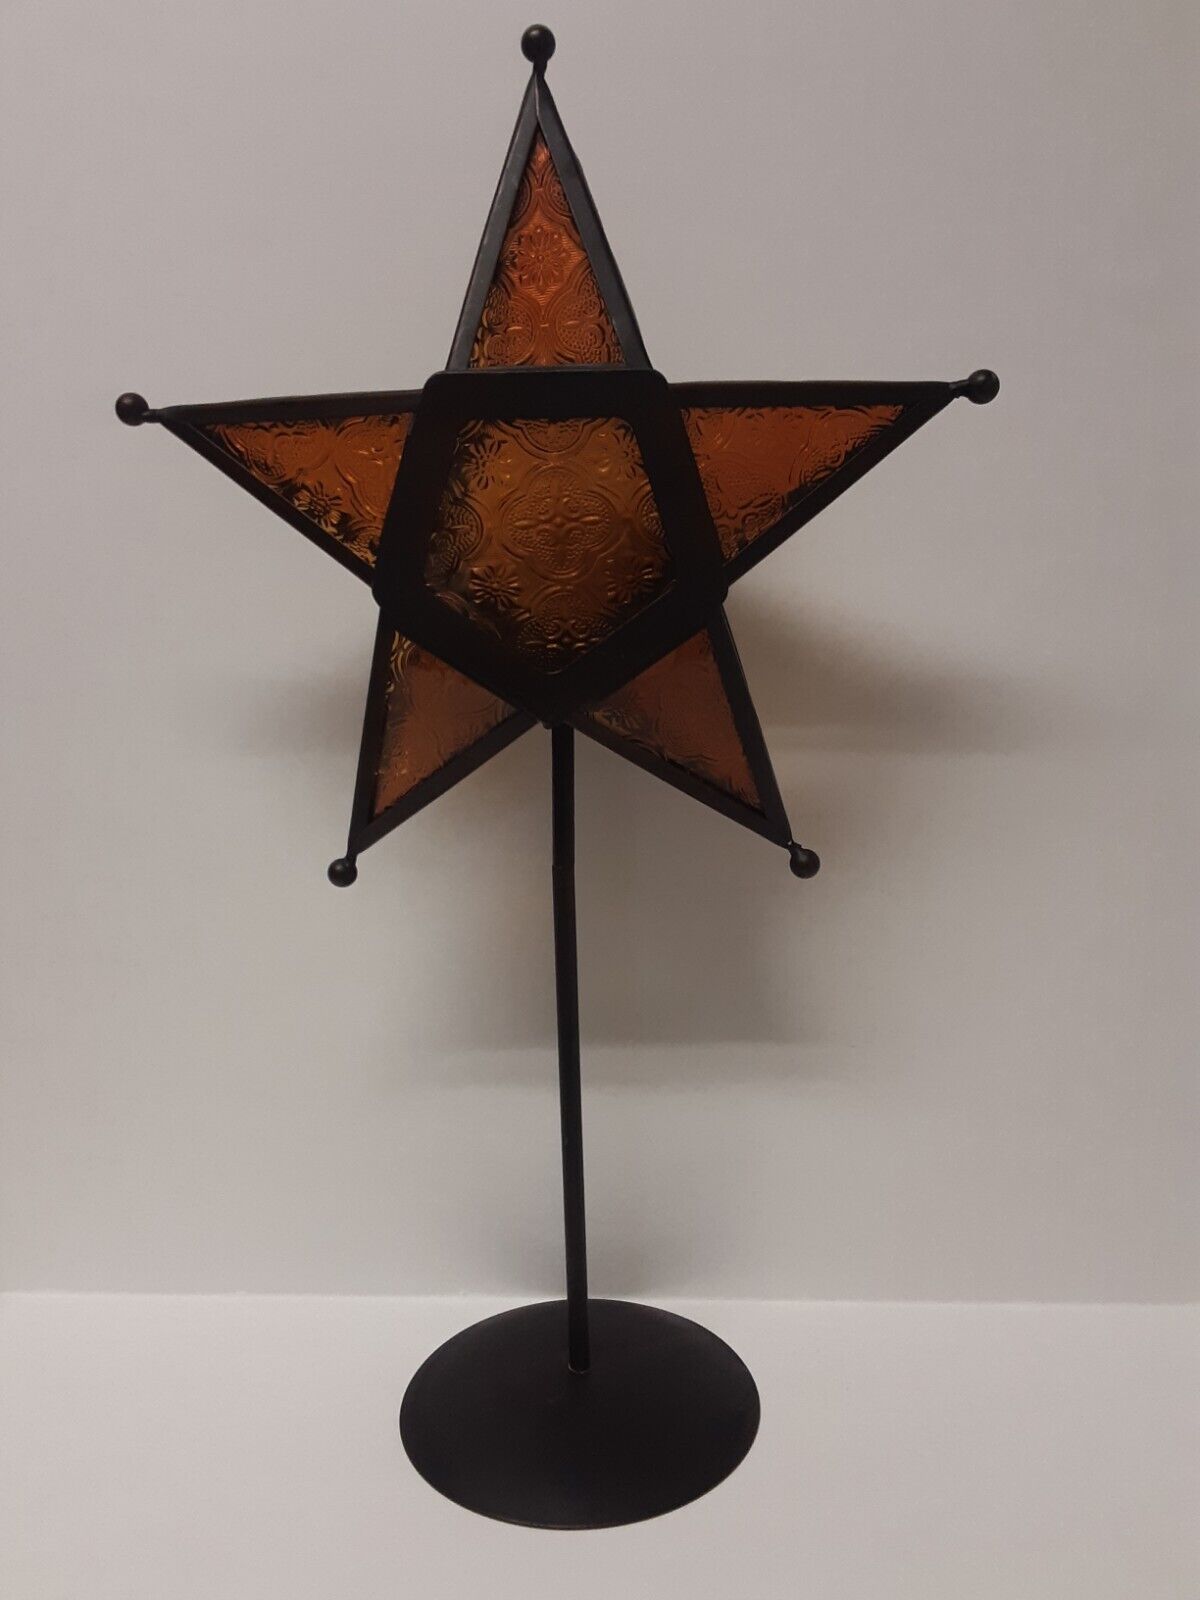 Moravian, Stamped Glass Star Shaped, Small Candle Holder